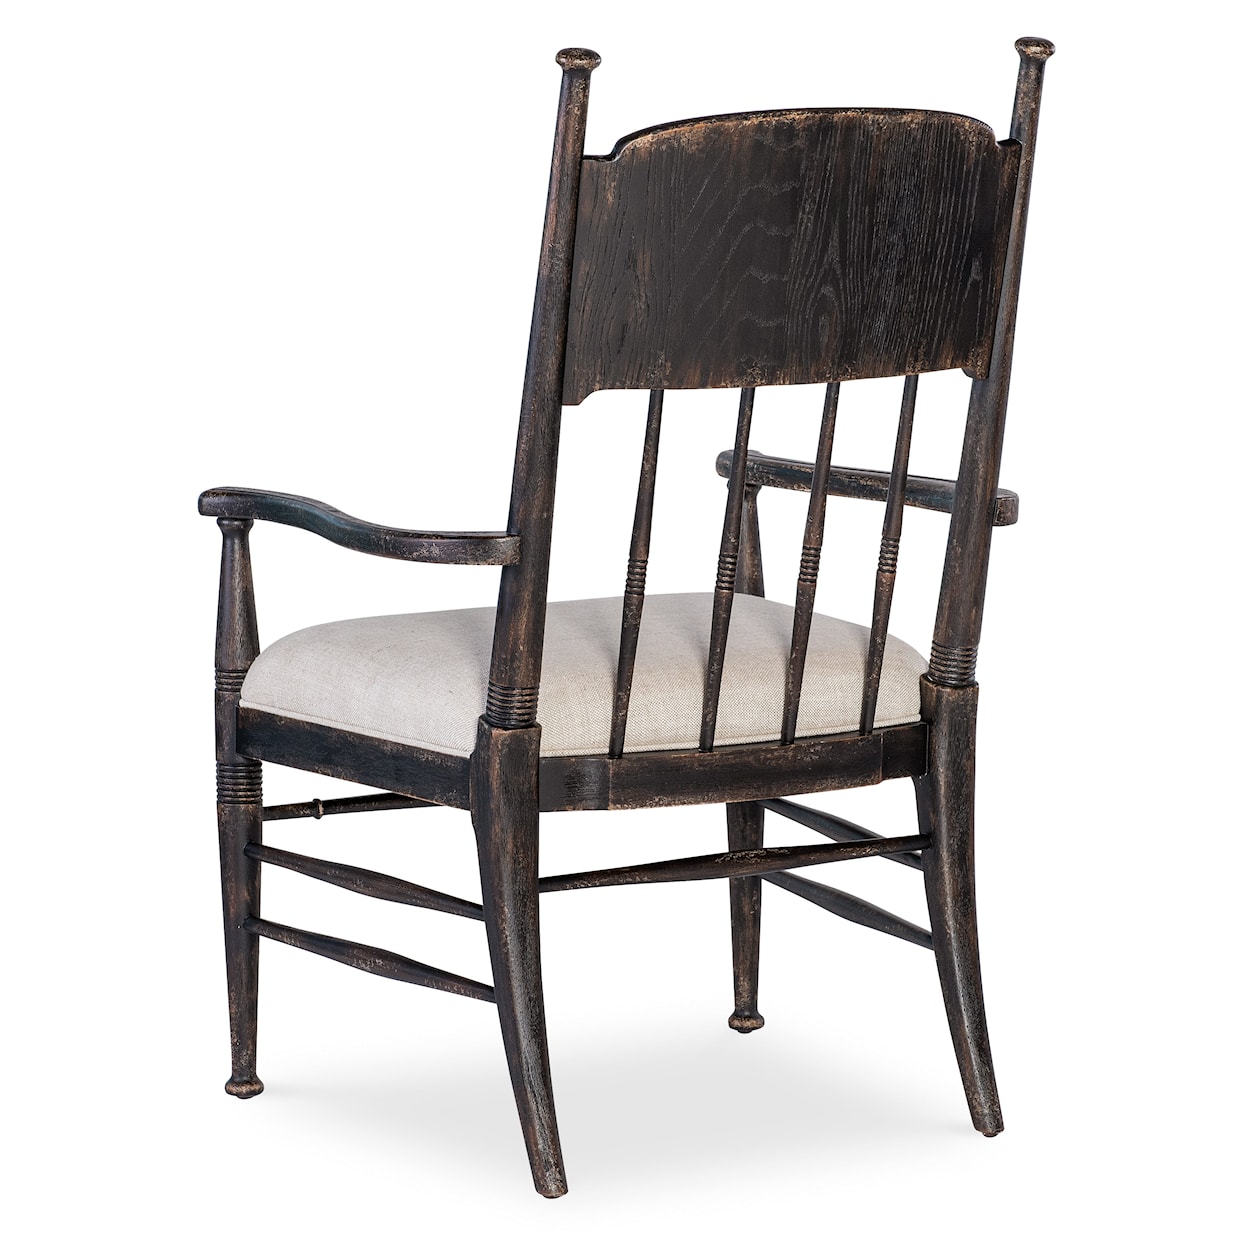 Hooker Furniture Americana Dining Side Chair